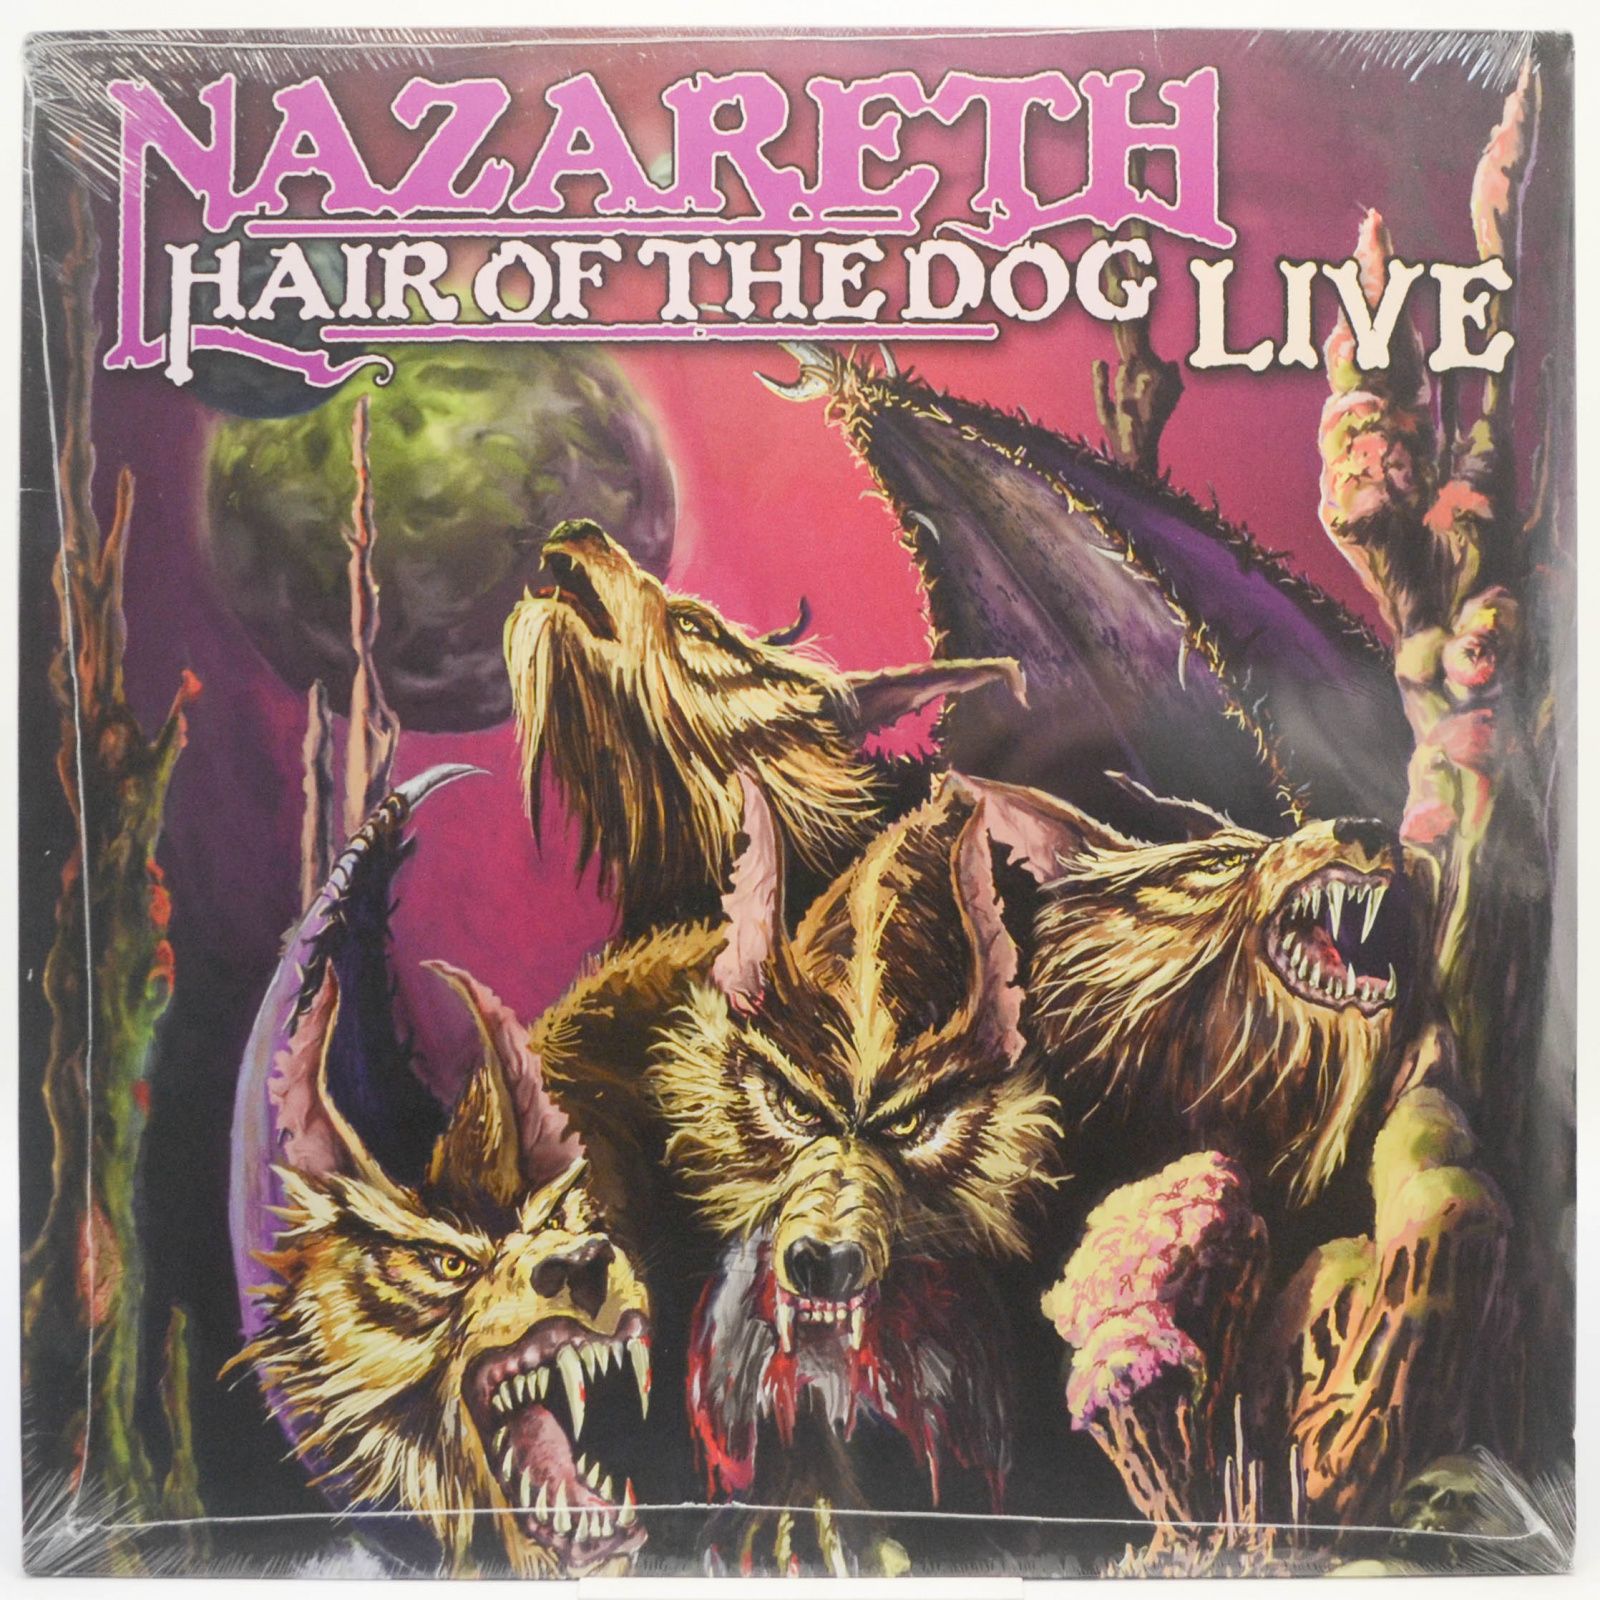 Hair Of The Dog Live, 2004